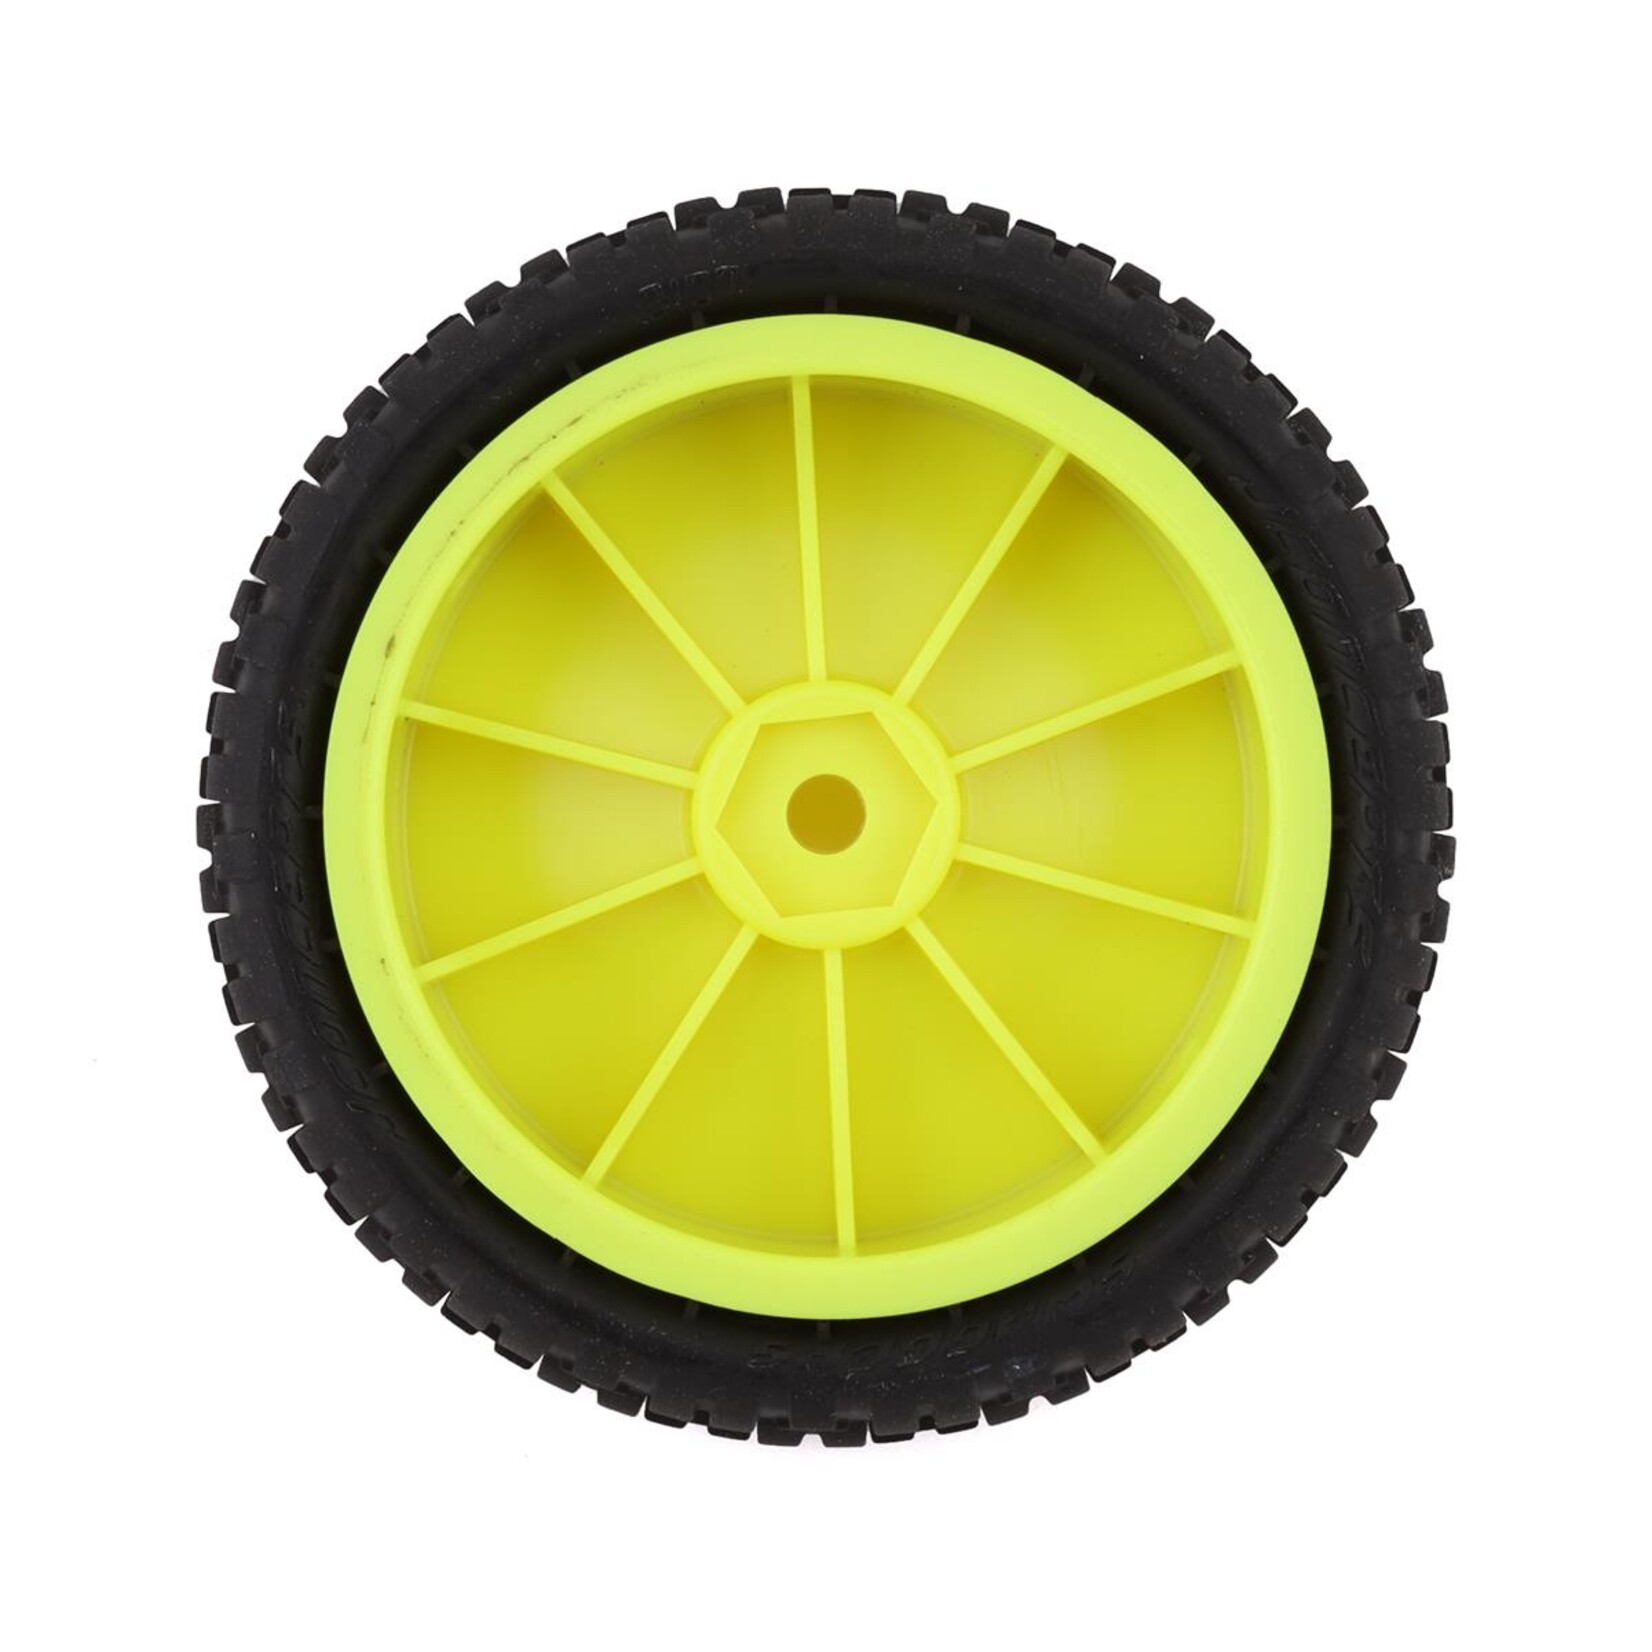 JConcepts JConcepts Swaggers 2.2" Pre-Mounted 2WD Front Buggy Carpet Tires (Yellow) (2) (Pink) w/12mm Hex #3137-201011